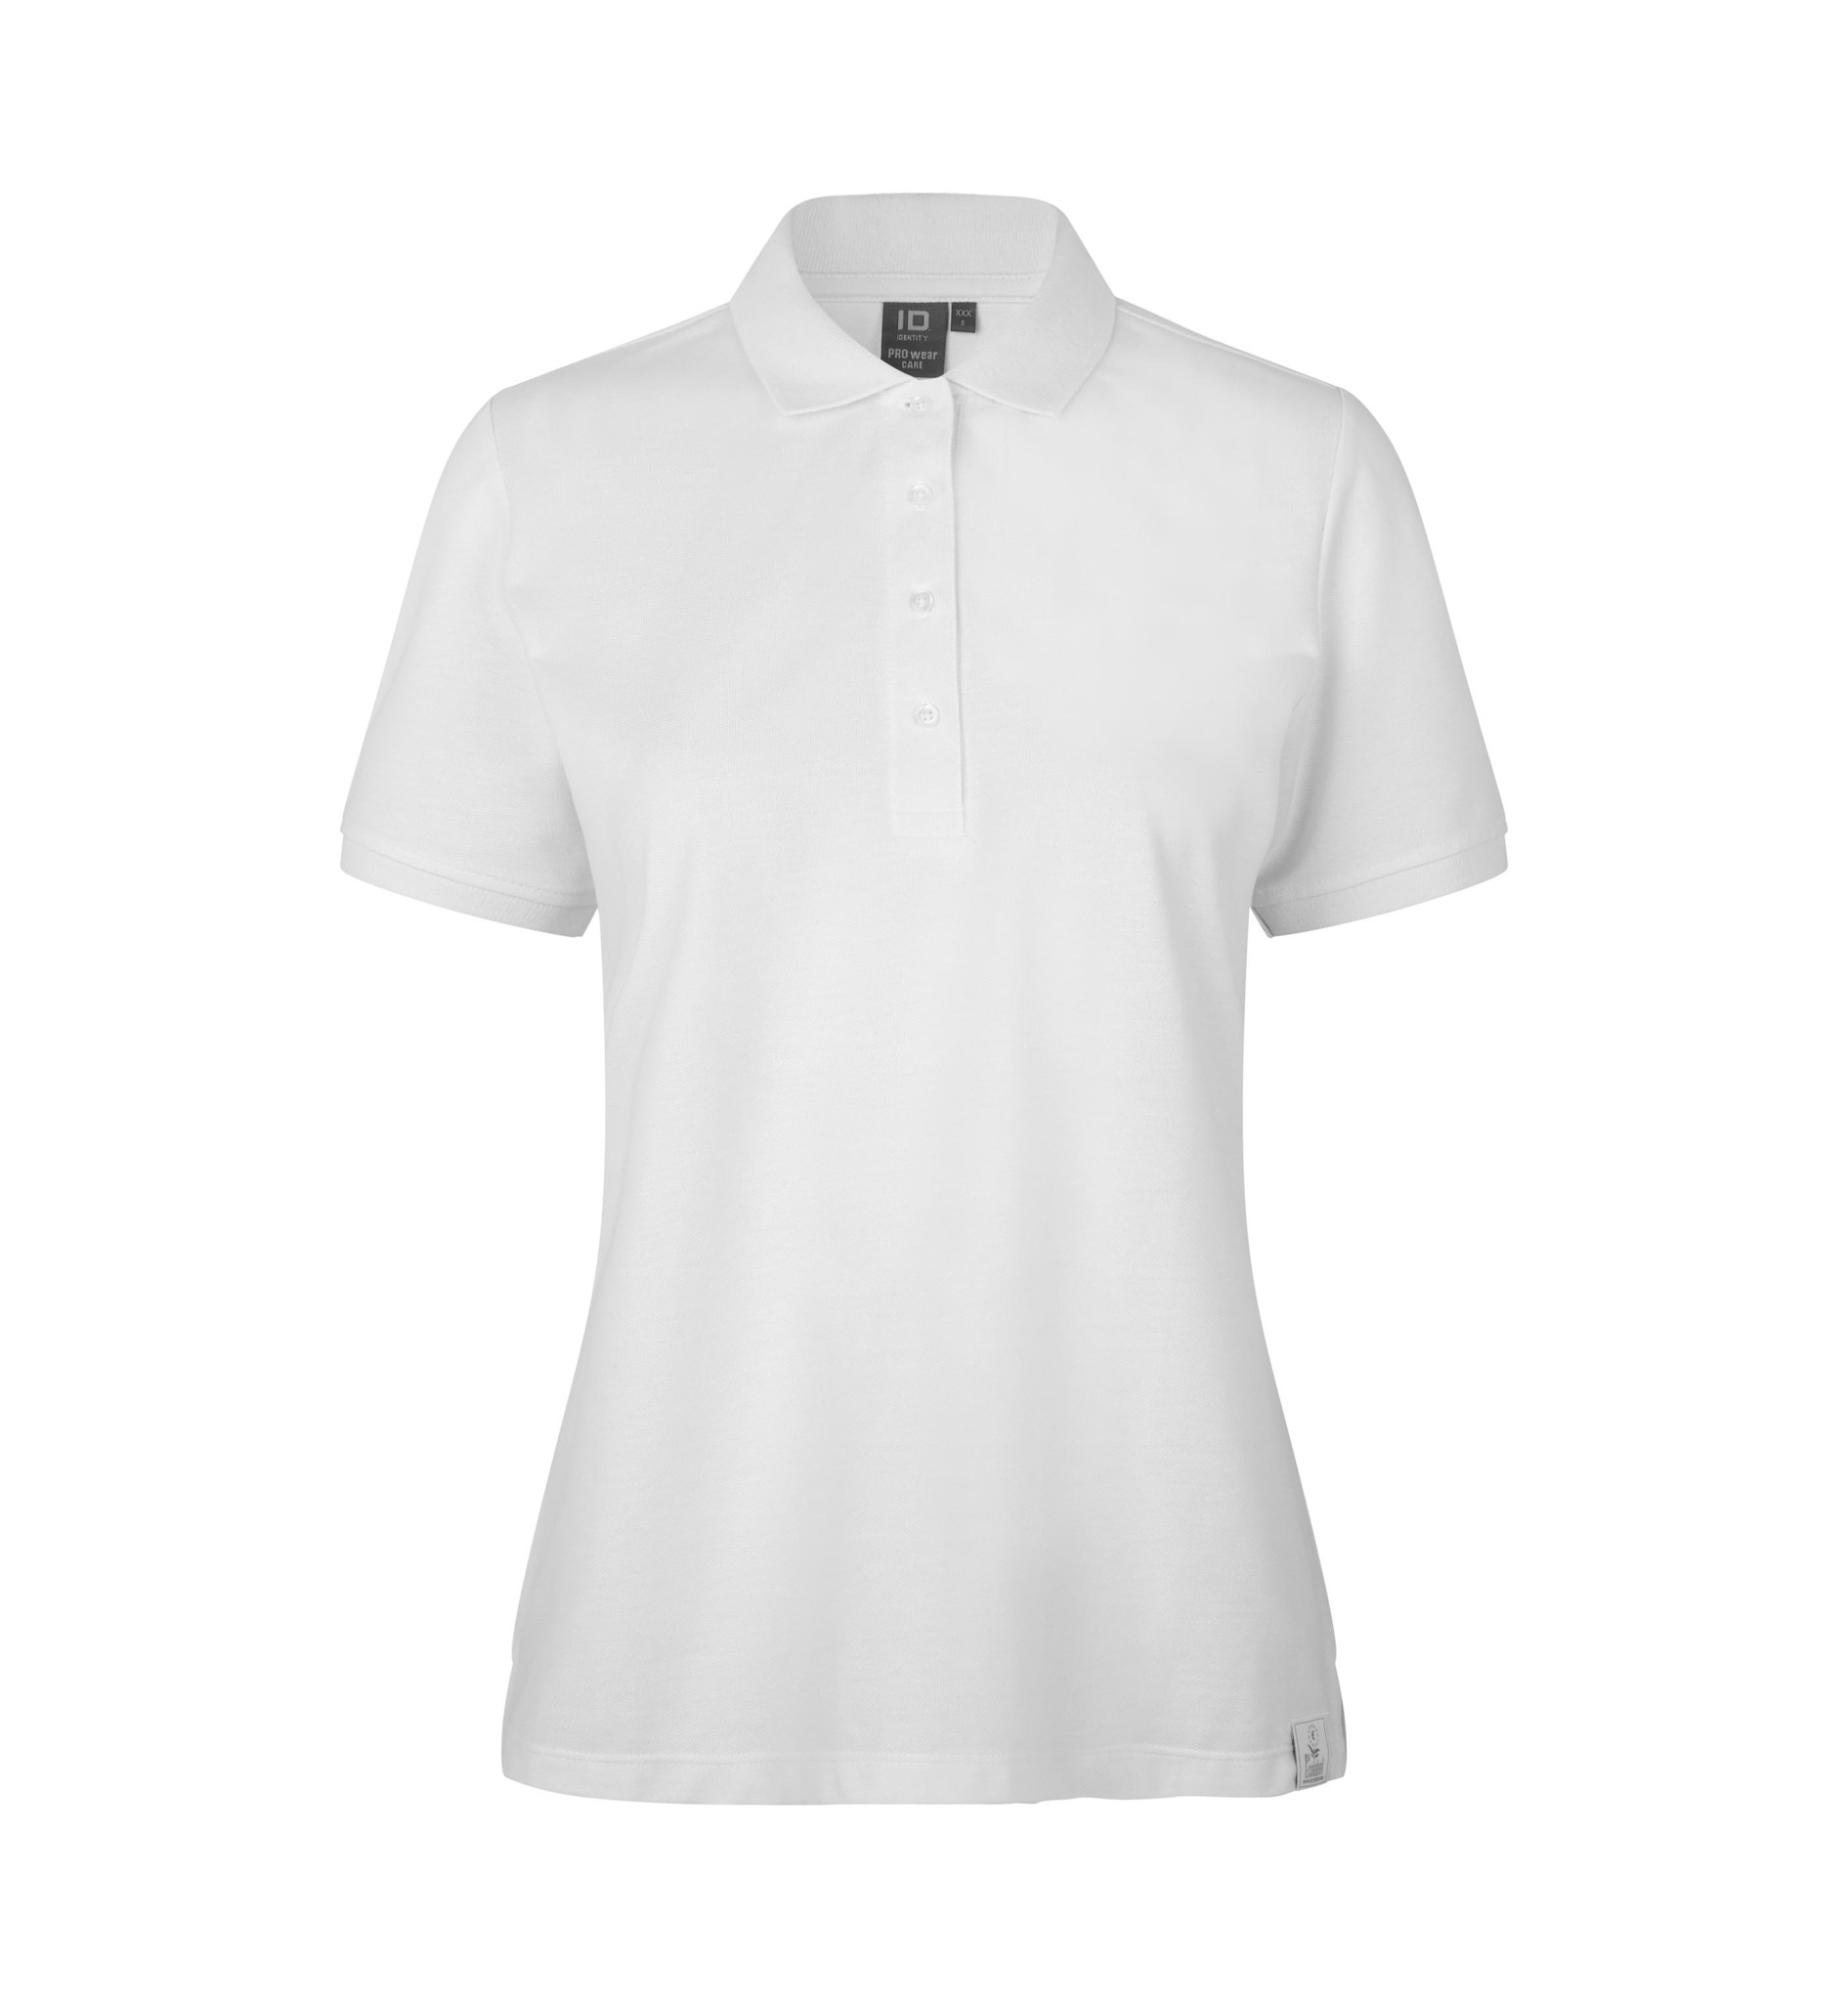 Picture of PRO Wear Care polo shirt